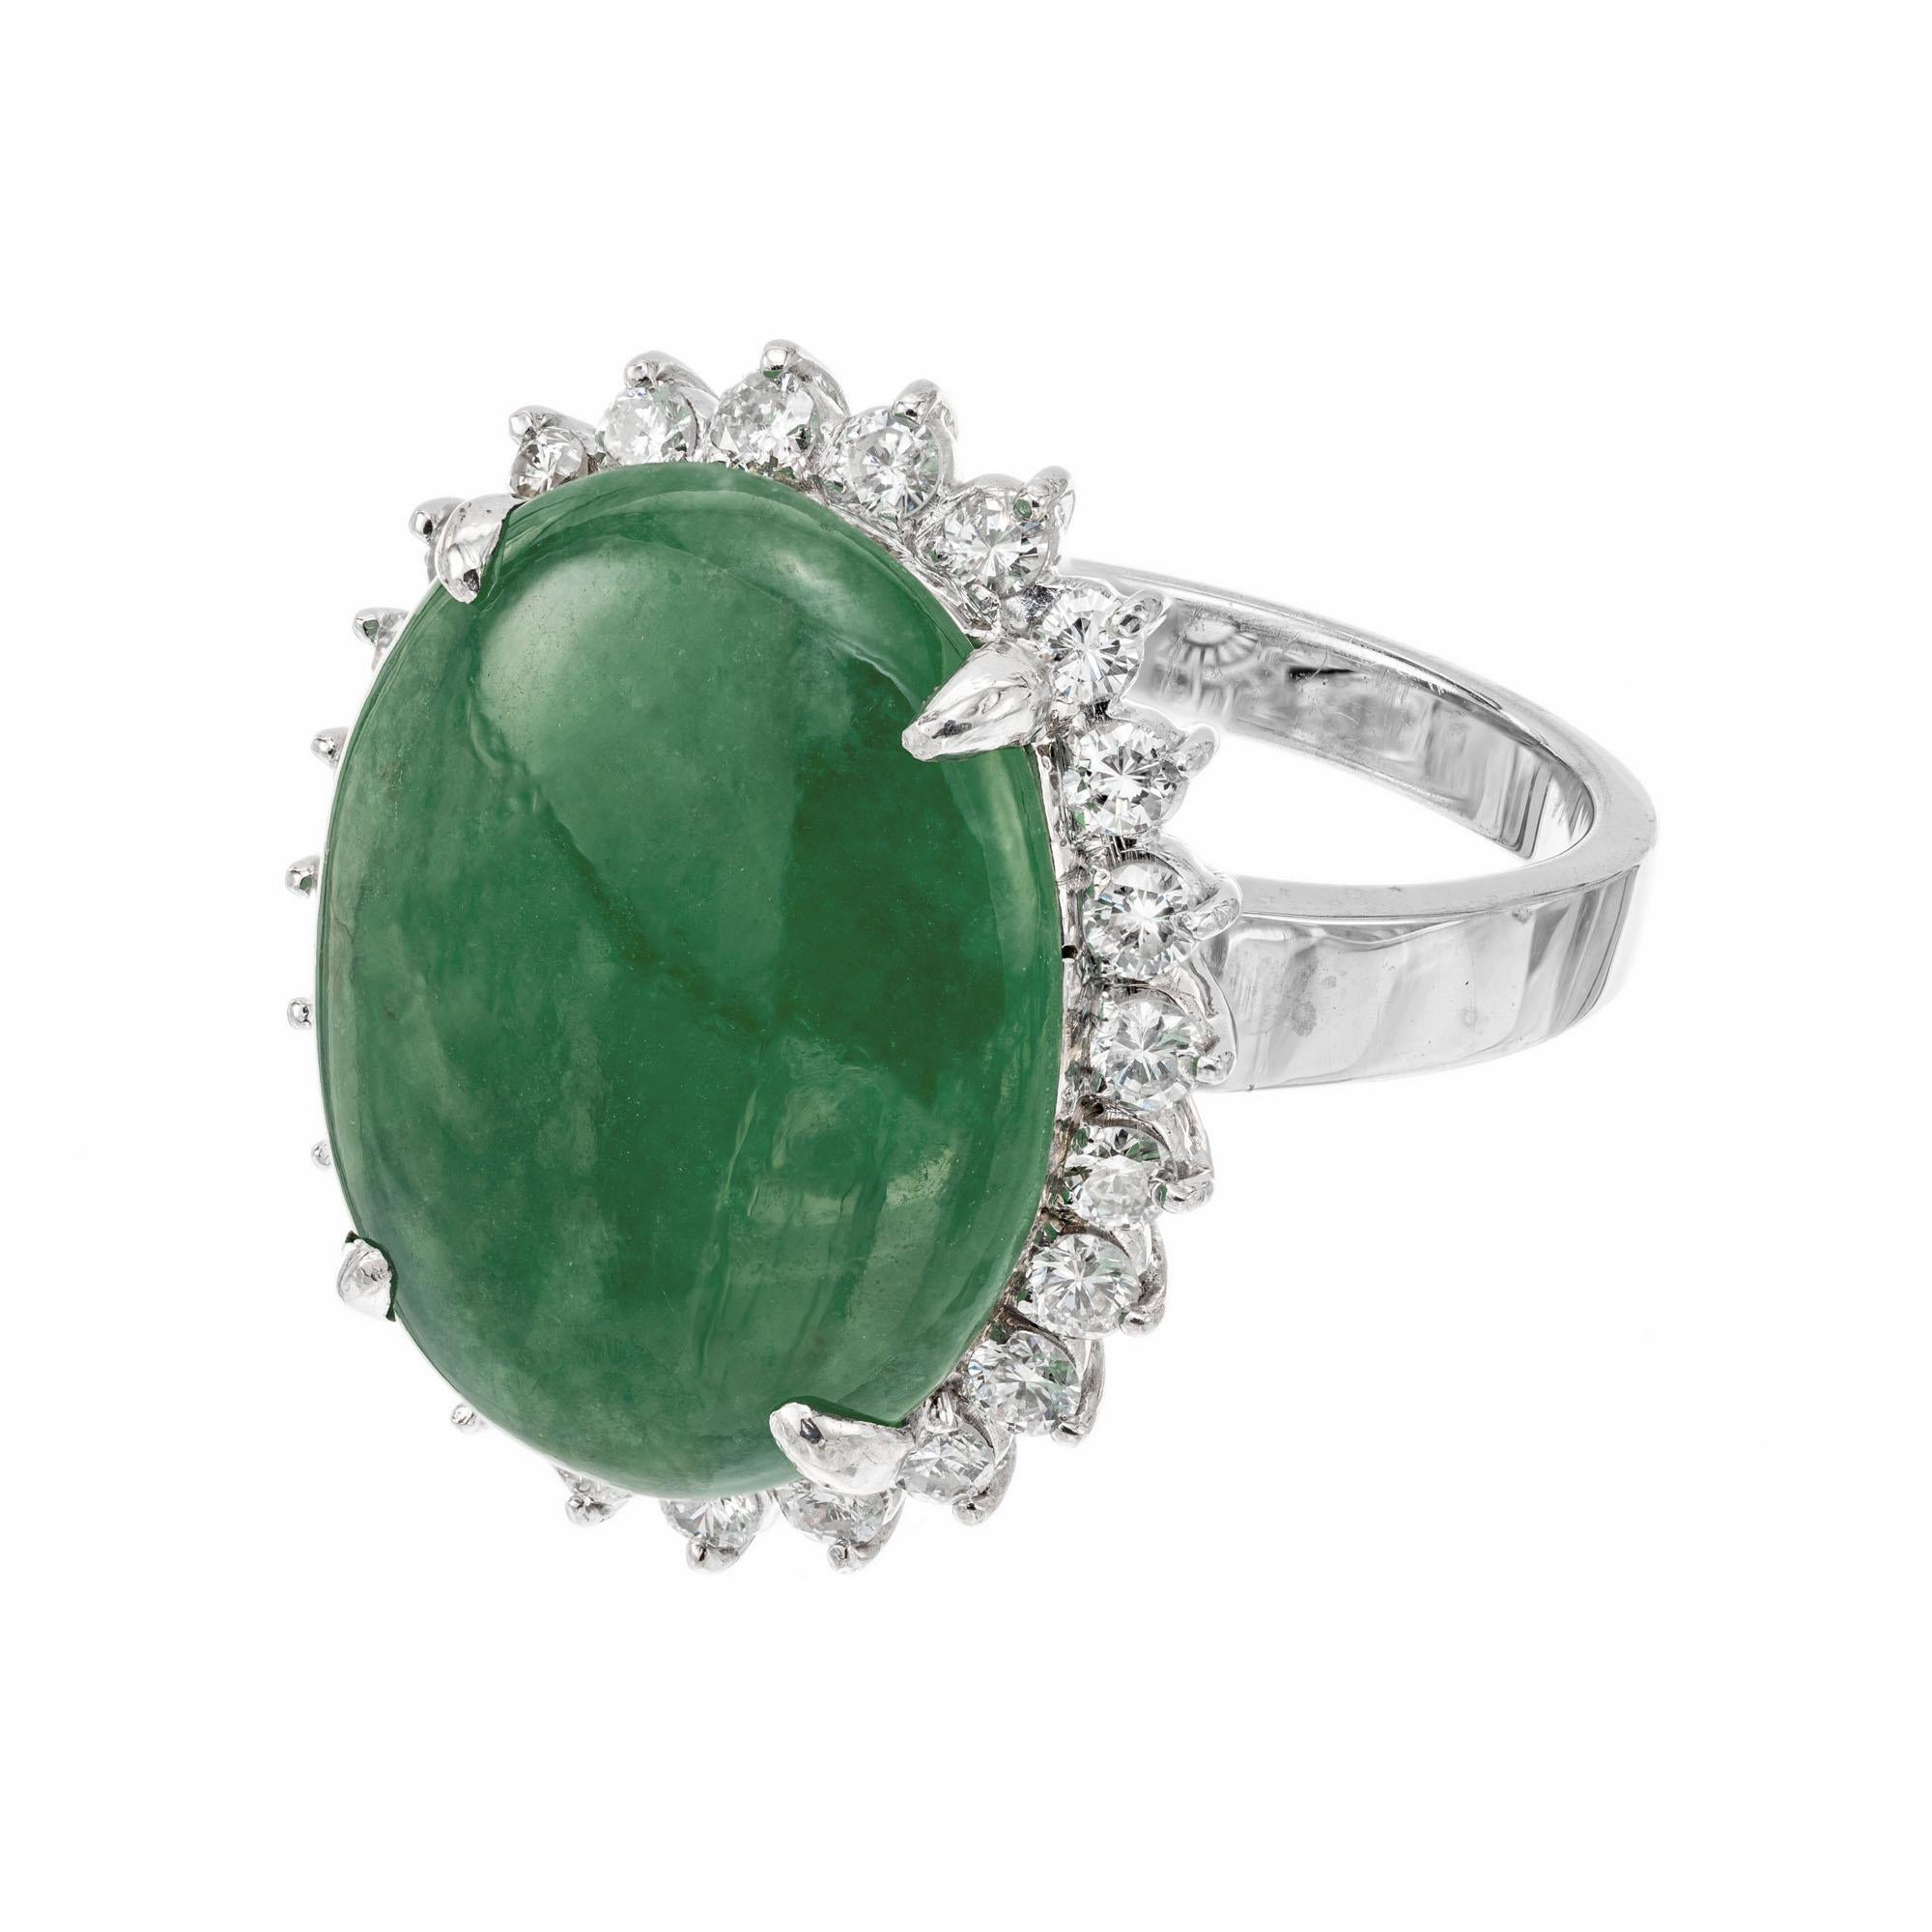 GIA Certified 8.95 Carat Jadeite Jade Diamond Halo White Gold Cocktail Ring In Good Condition For Sale In Stamford, CT